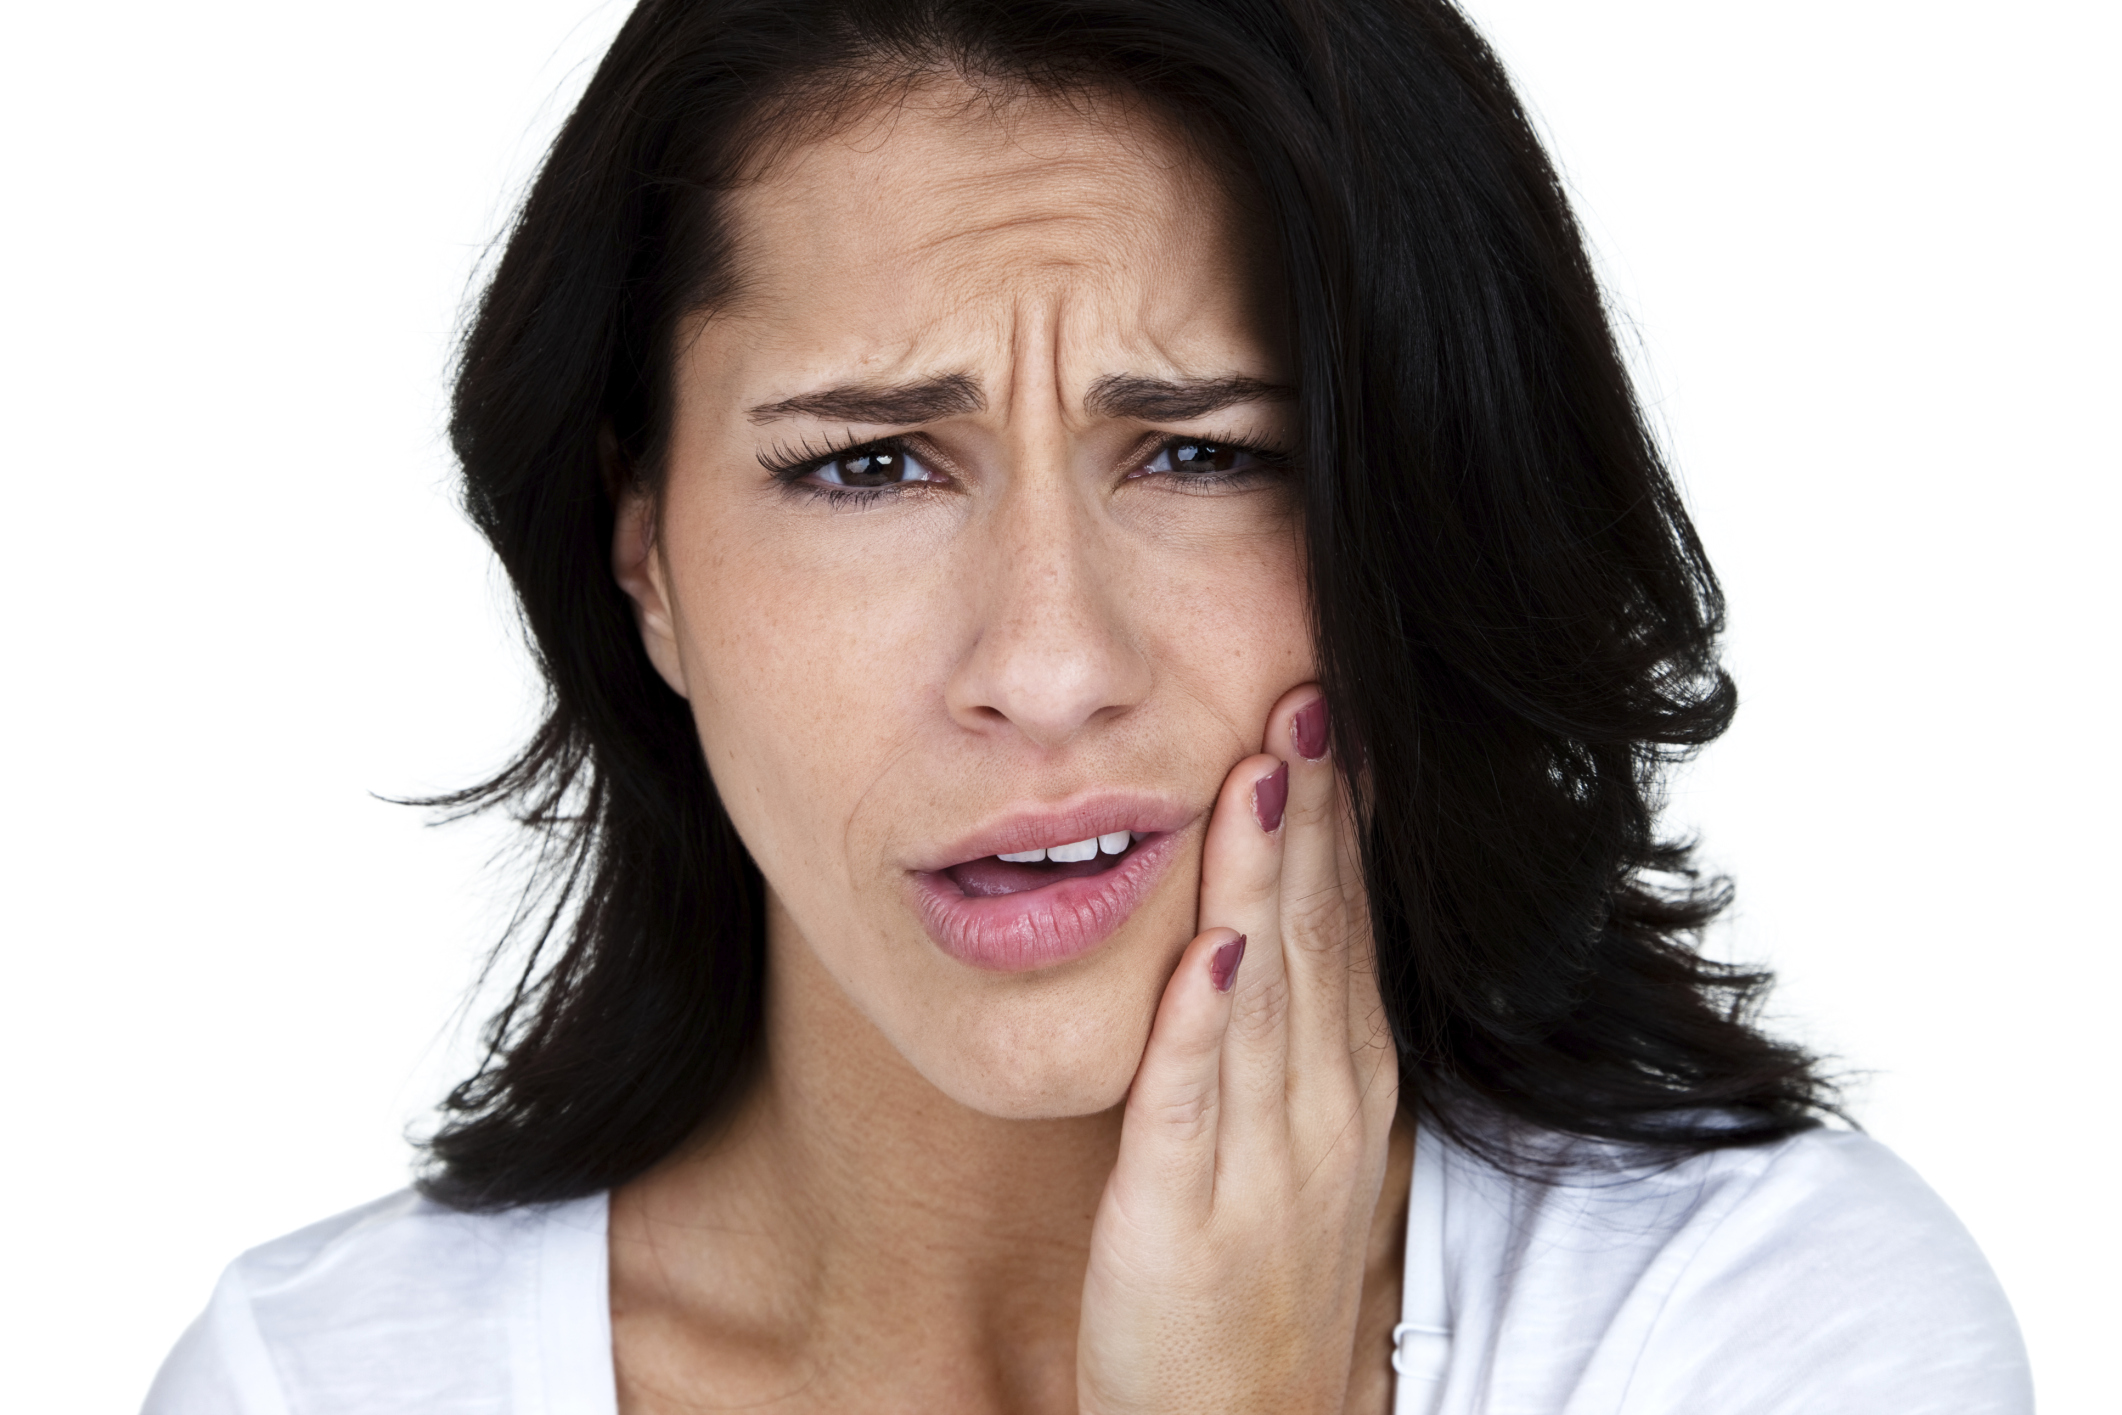 Why Does Jaw Pain Happen?